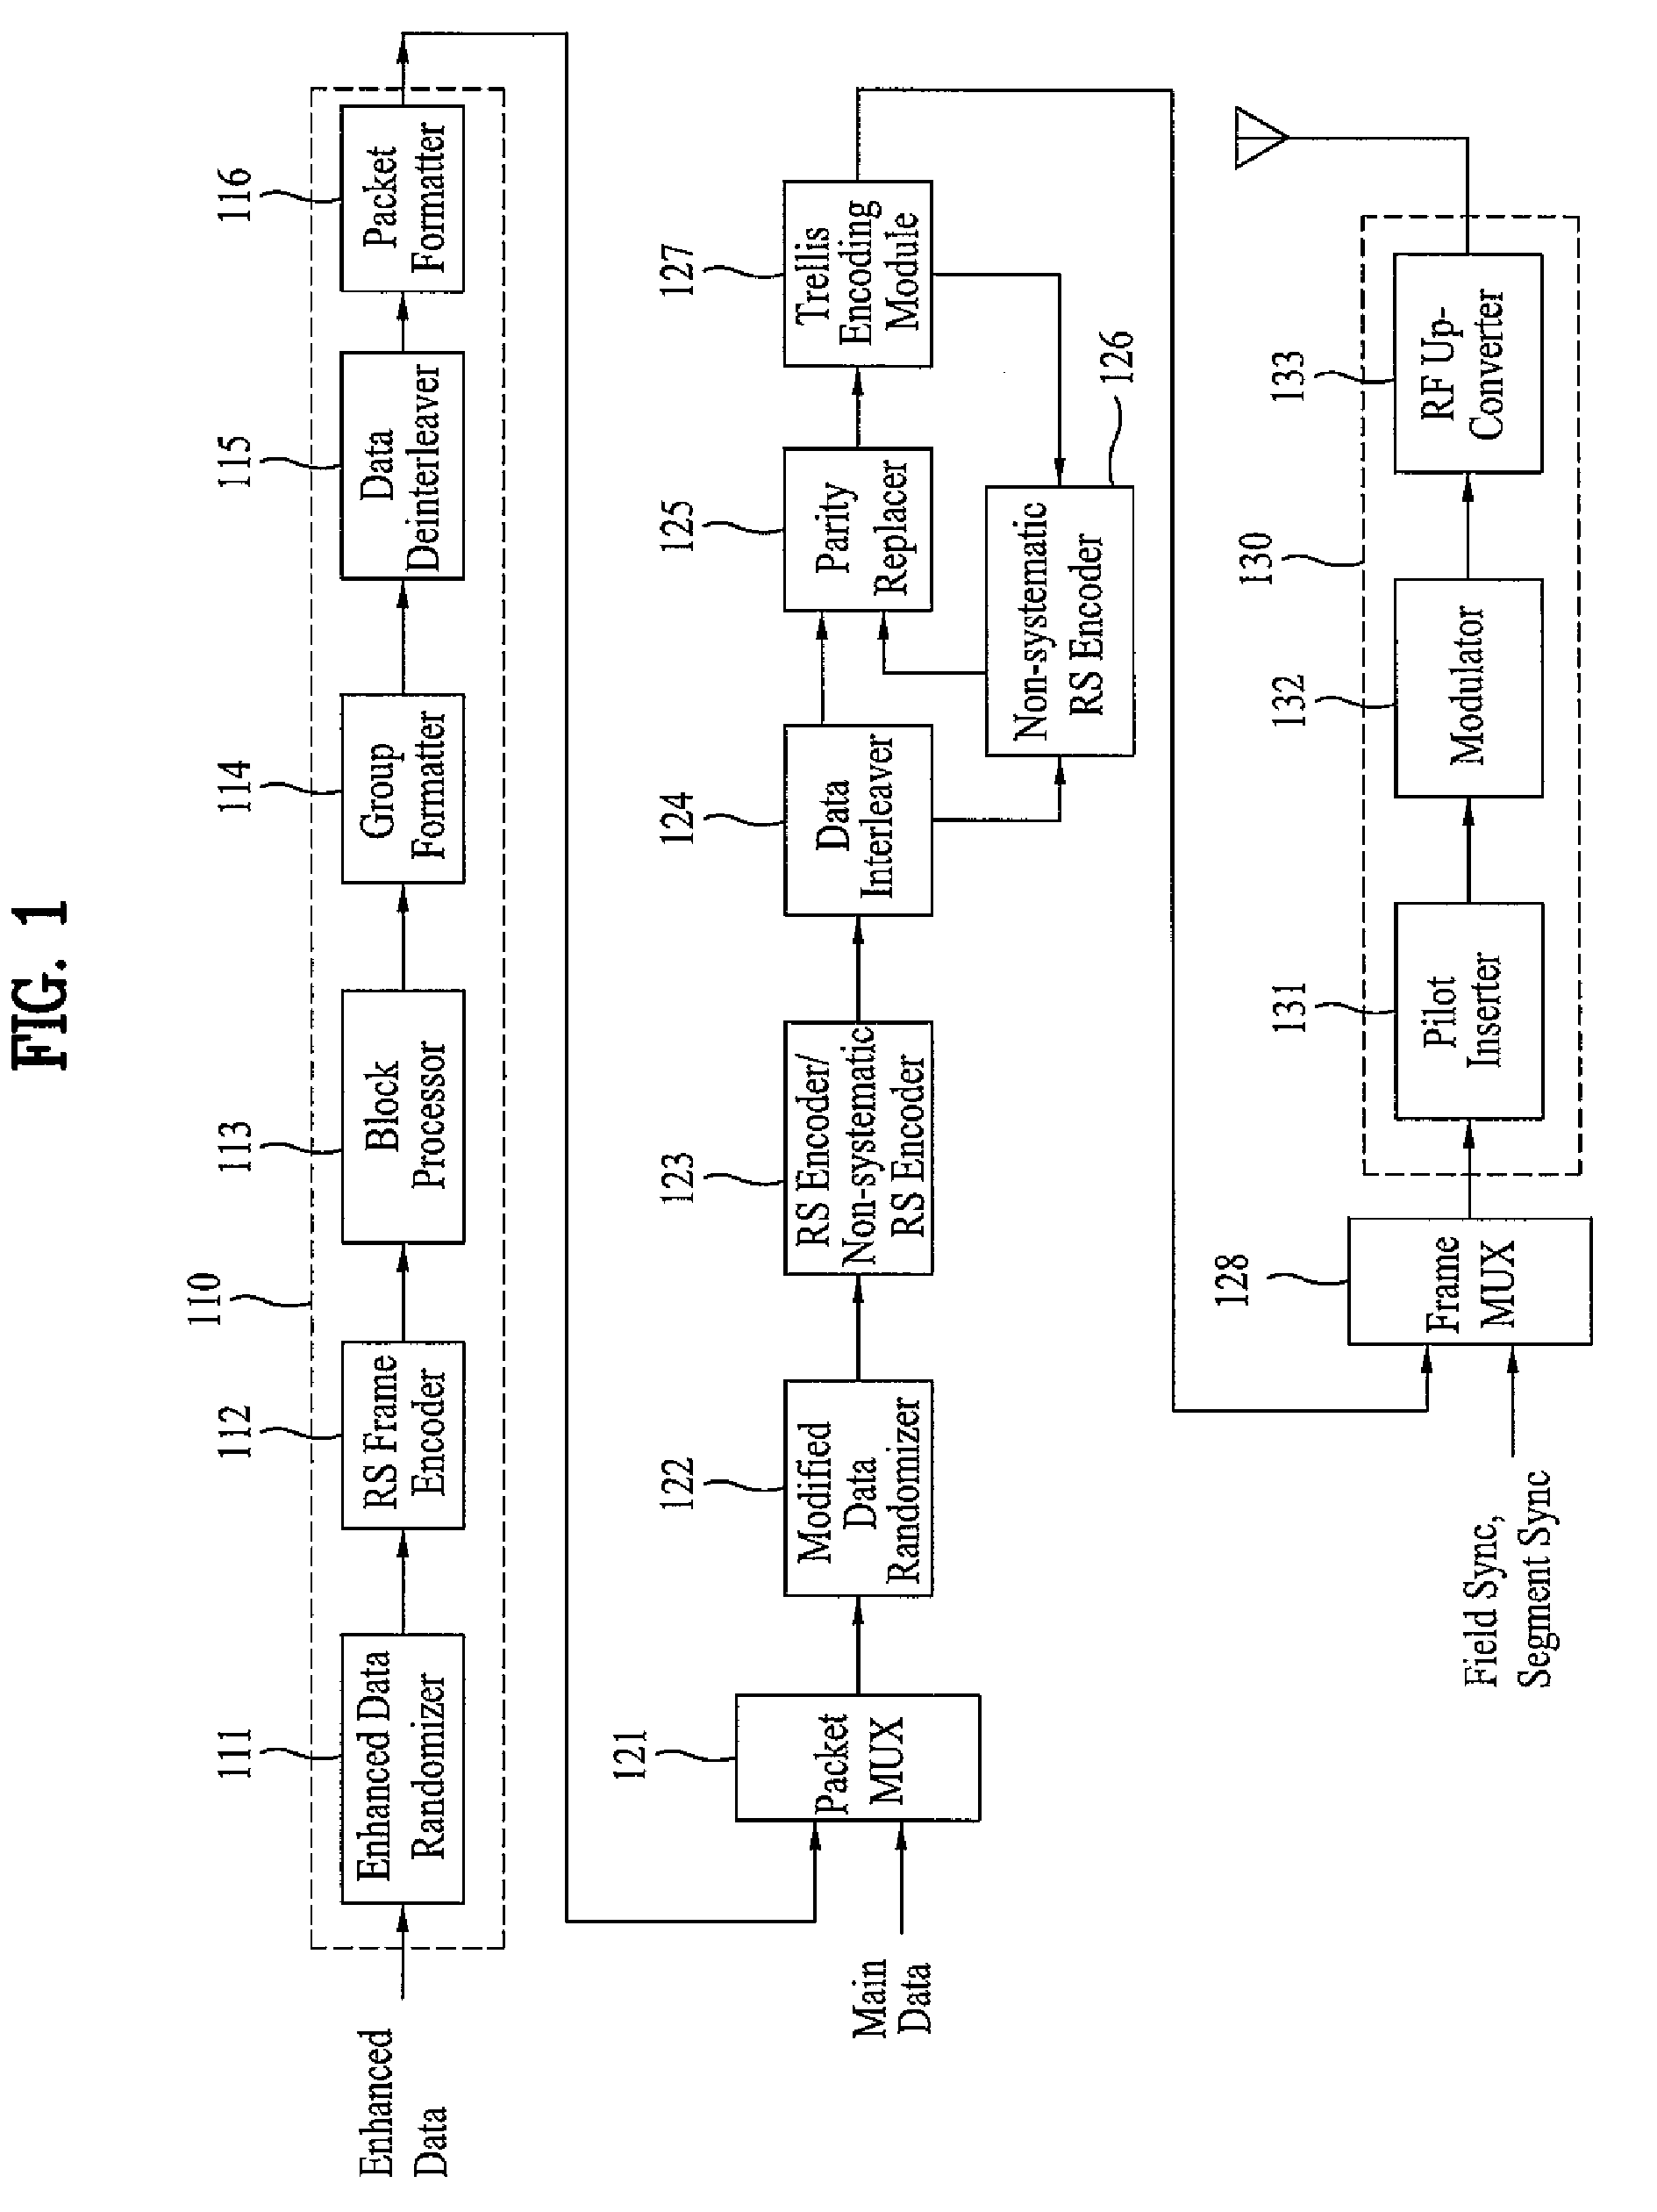 DTV receiving system and method of processing broadcast data therein